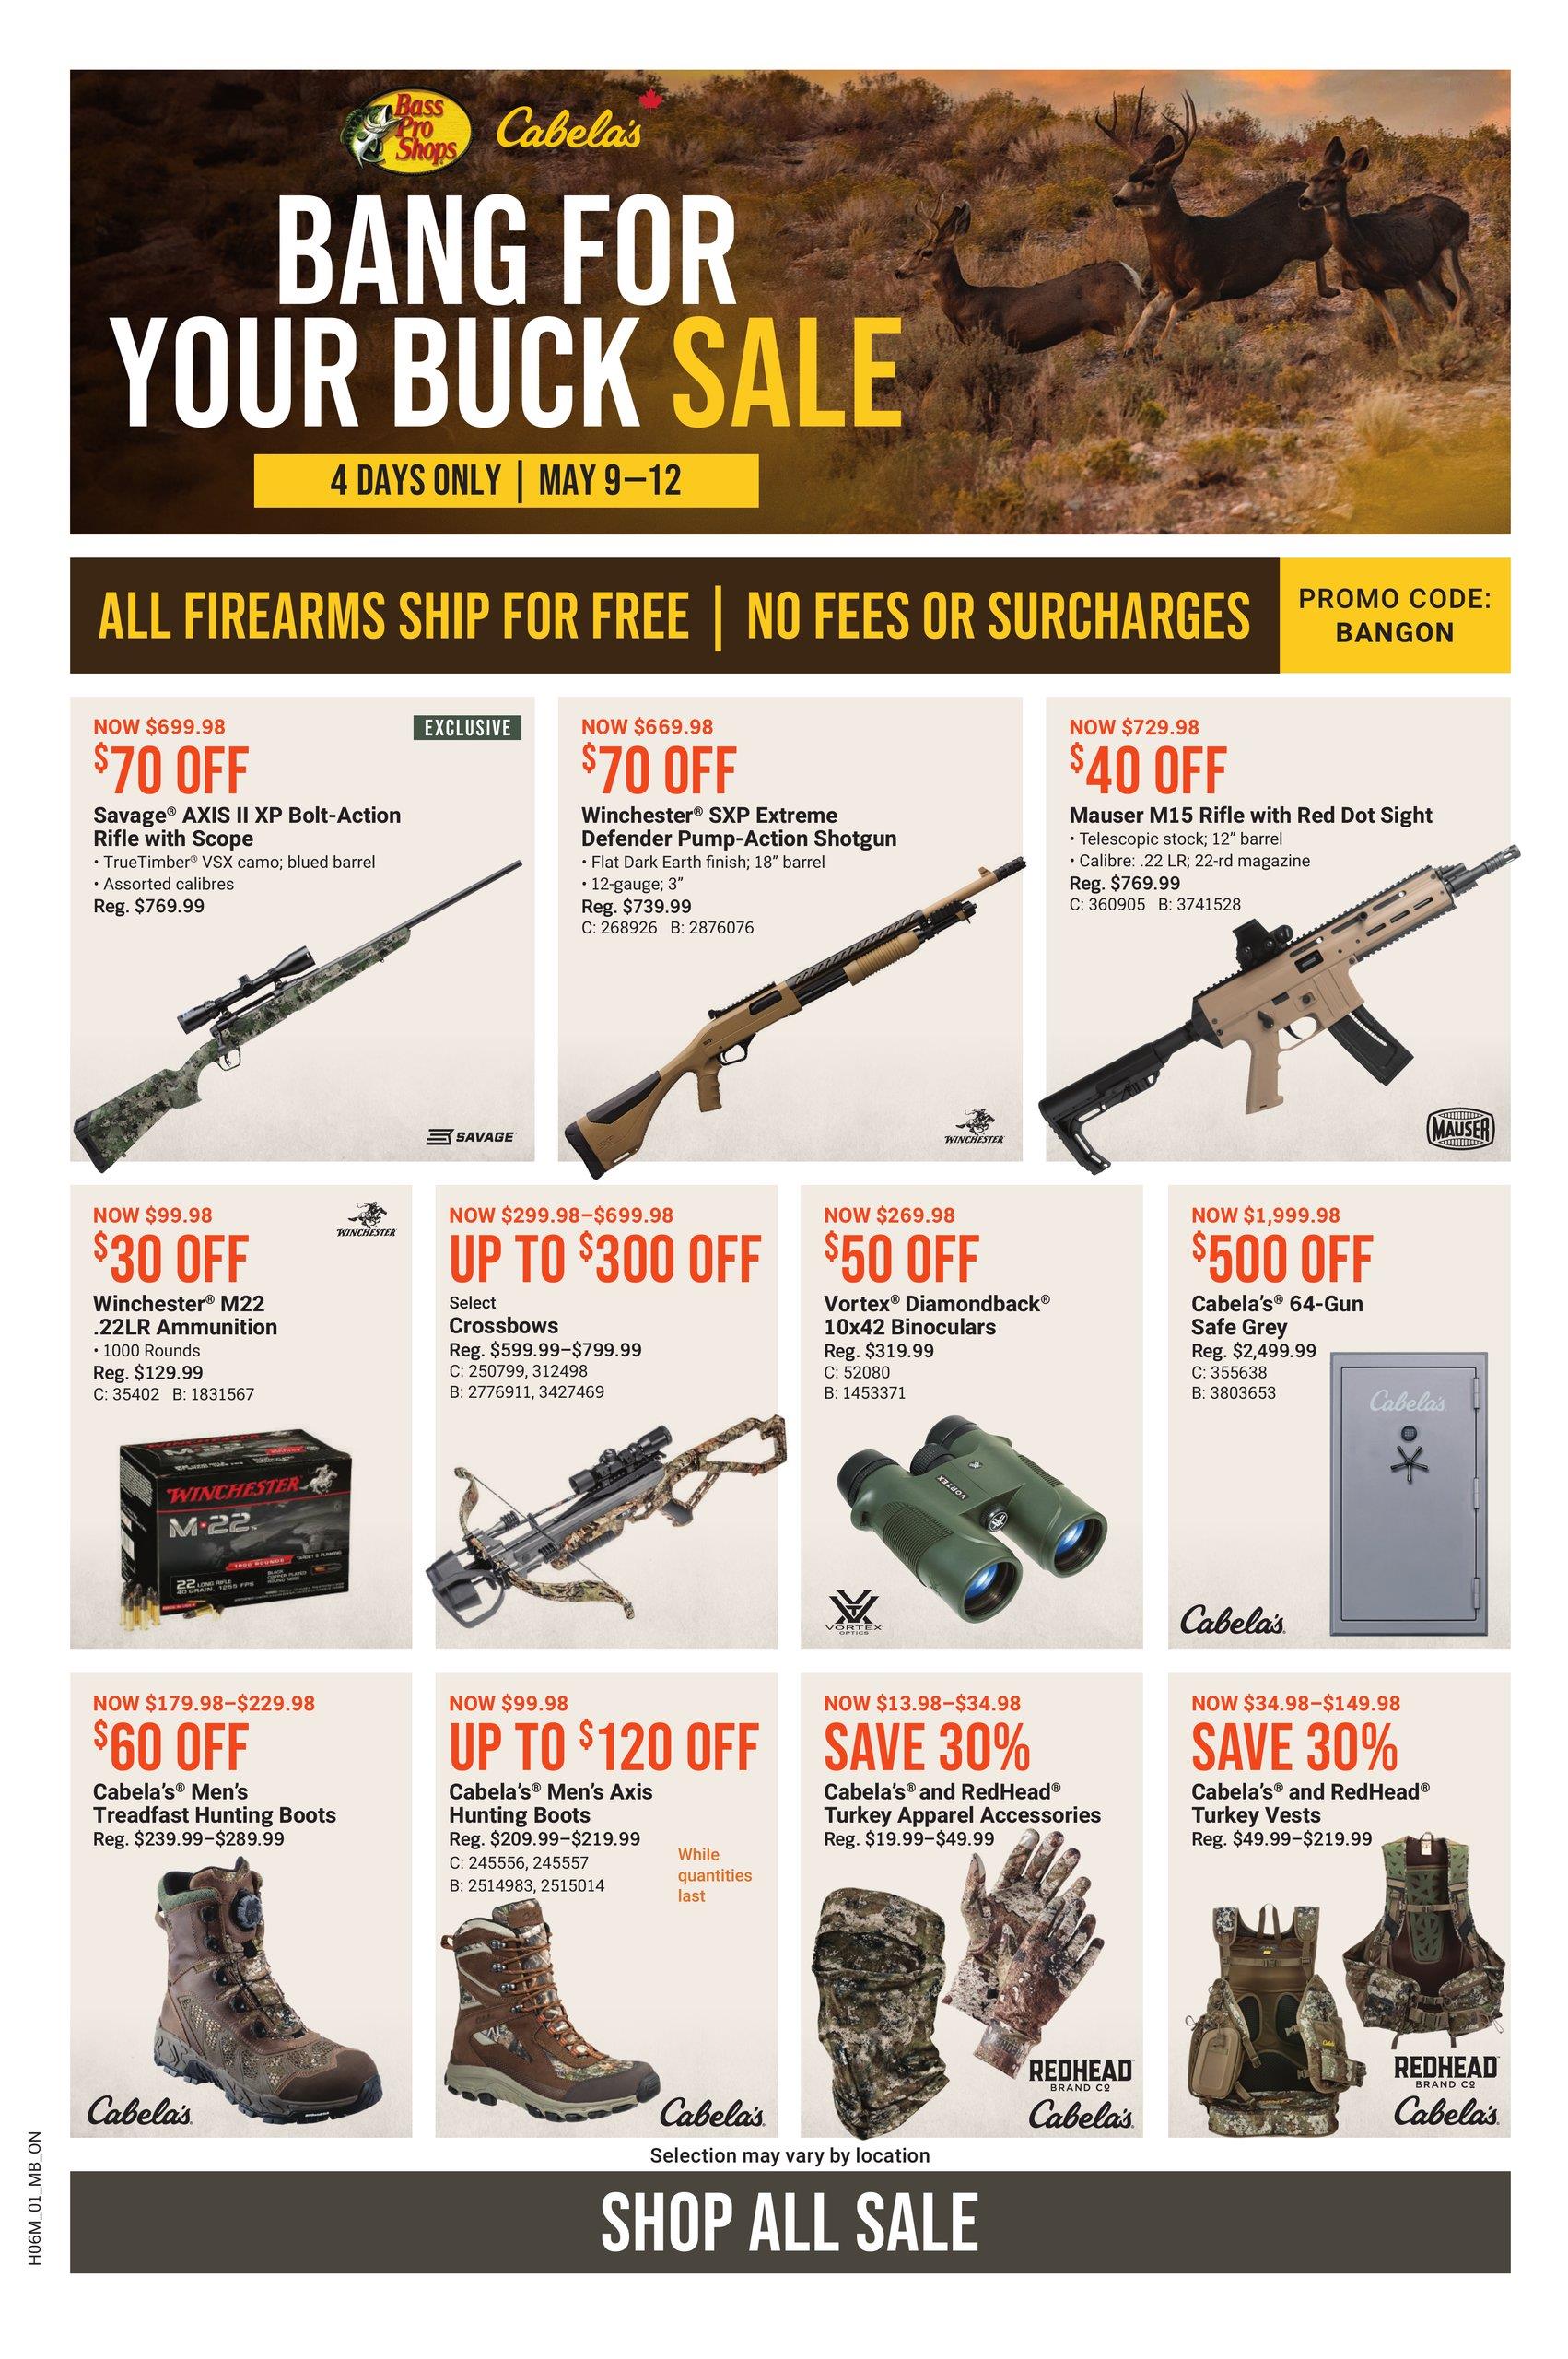 Bass Pro Shops - Bang for your Buck Sale